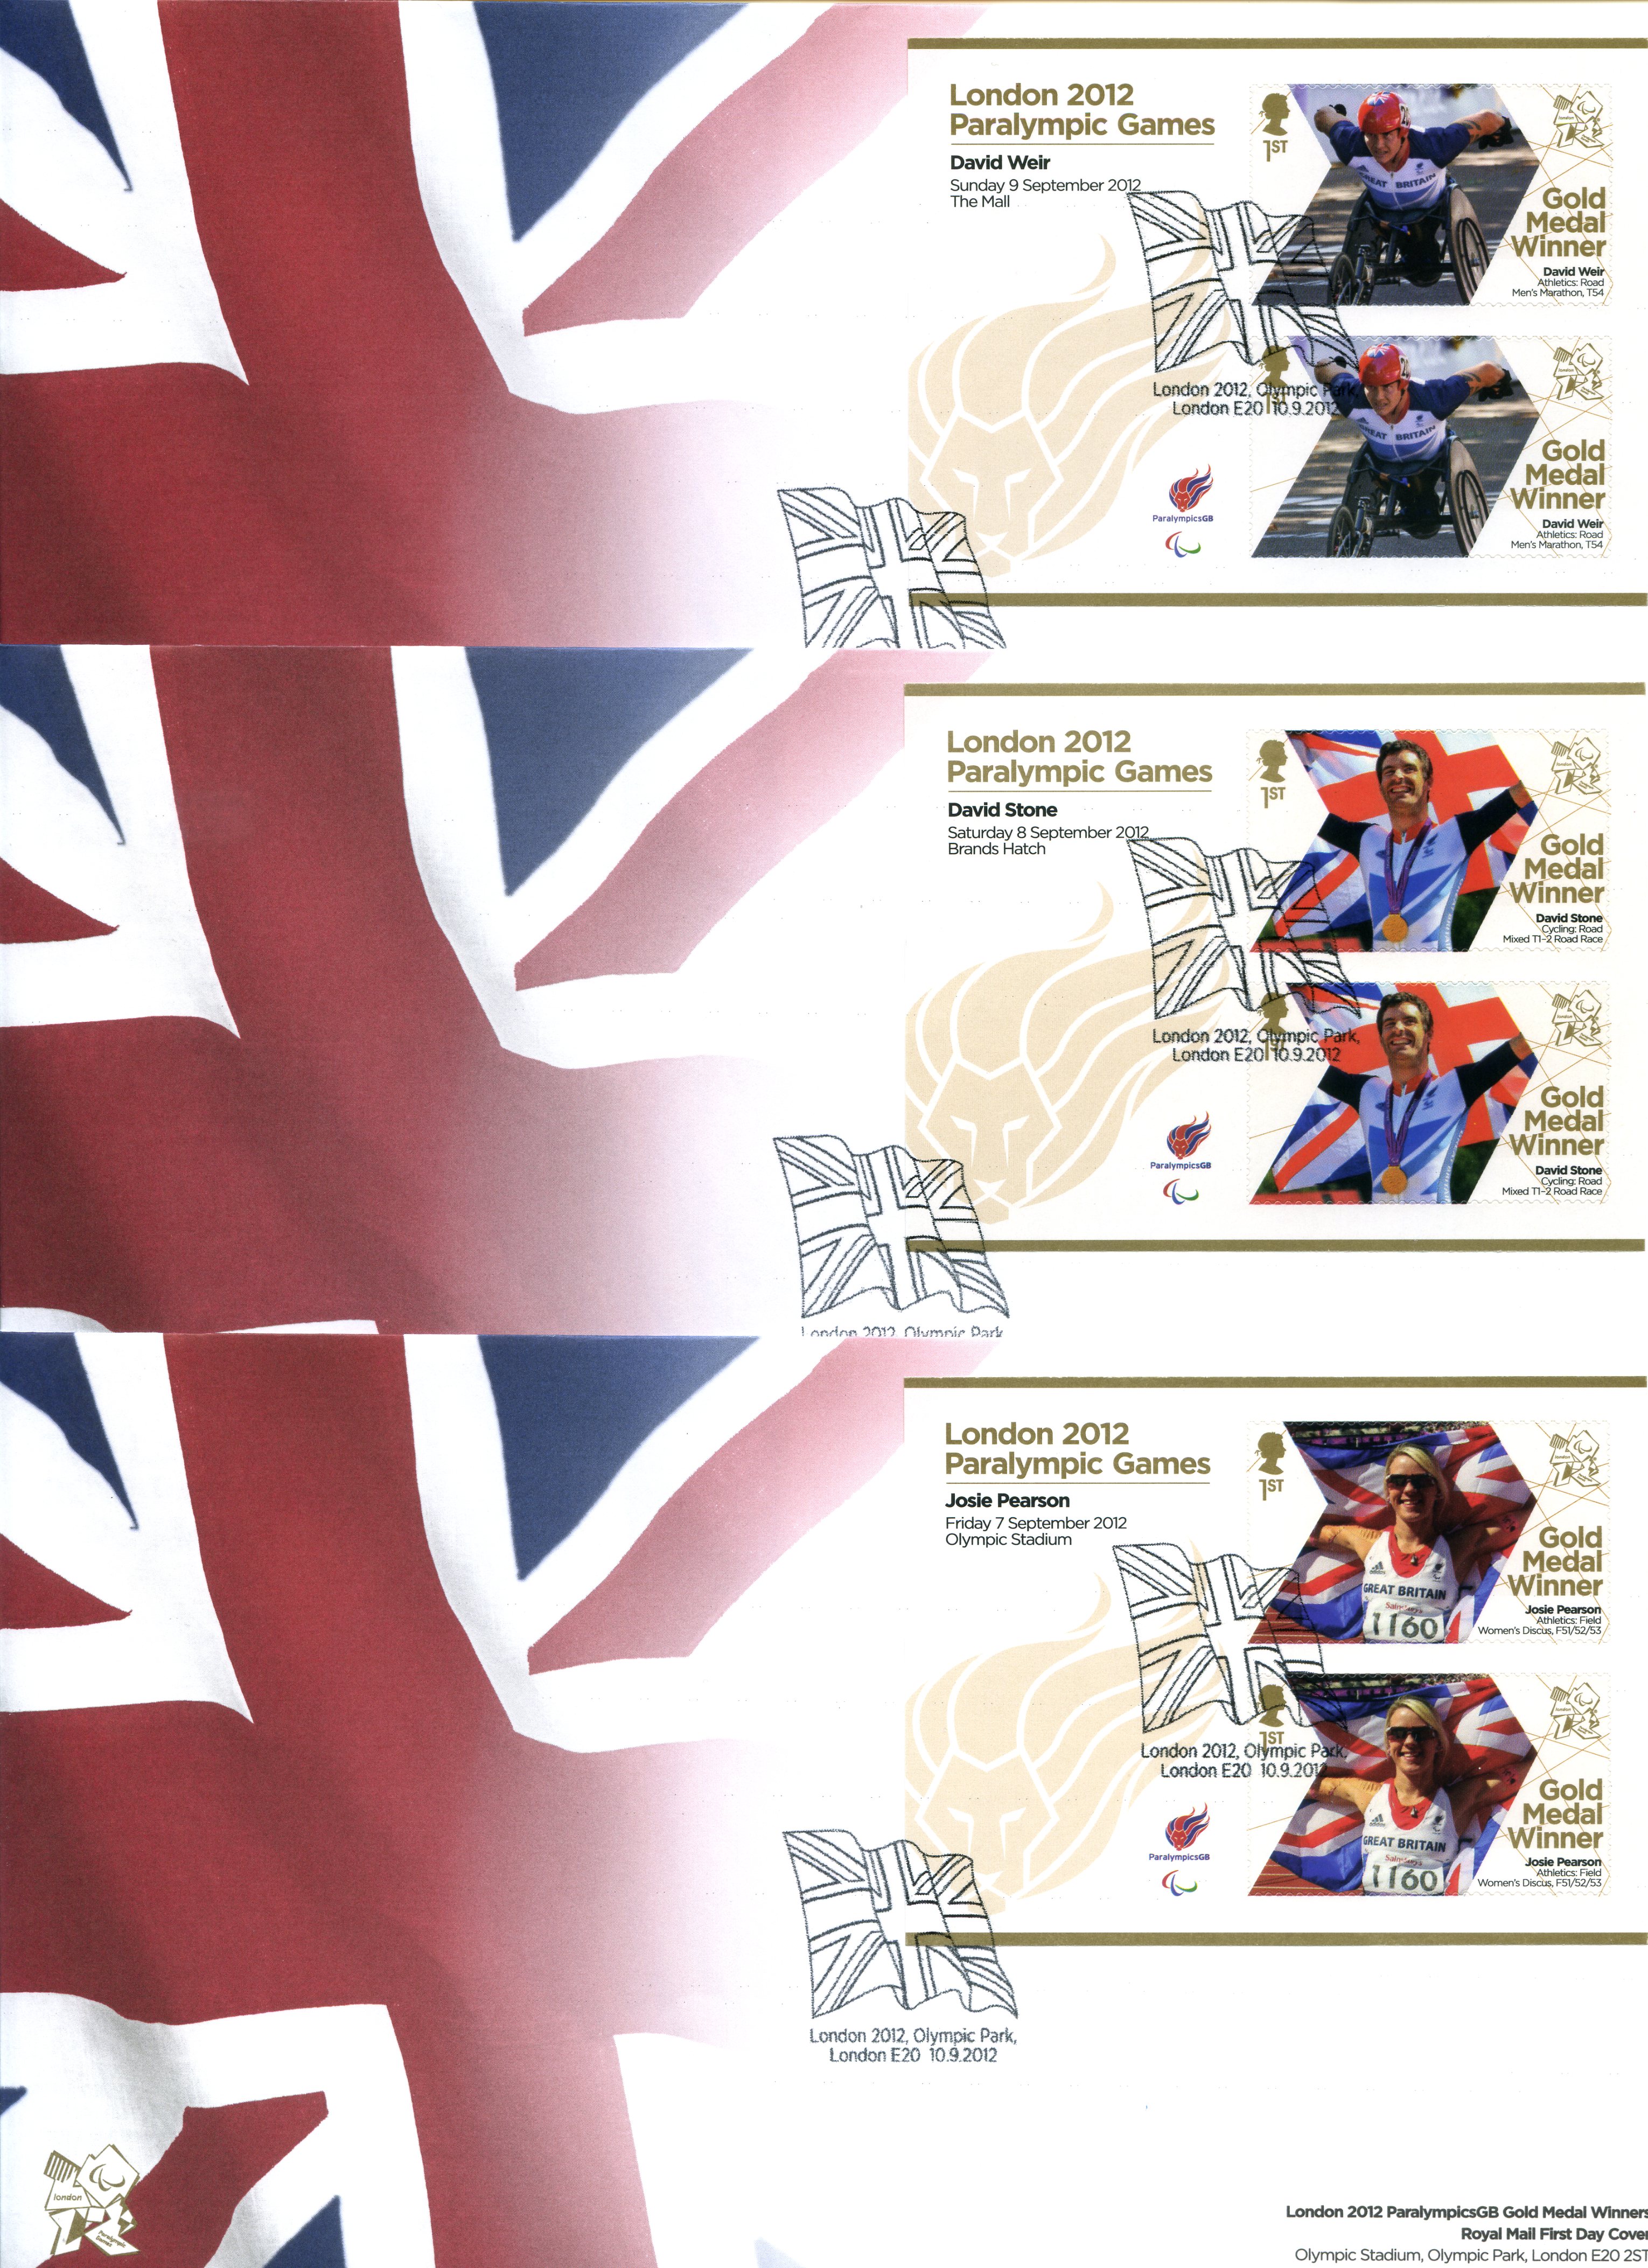 2012 LONDON PARALYMPIC GAMES - FULL SET OF 34 POSTAL COVERS - Image 2 of 9